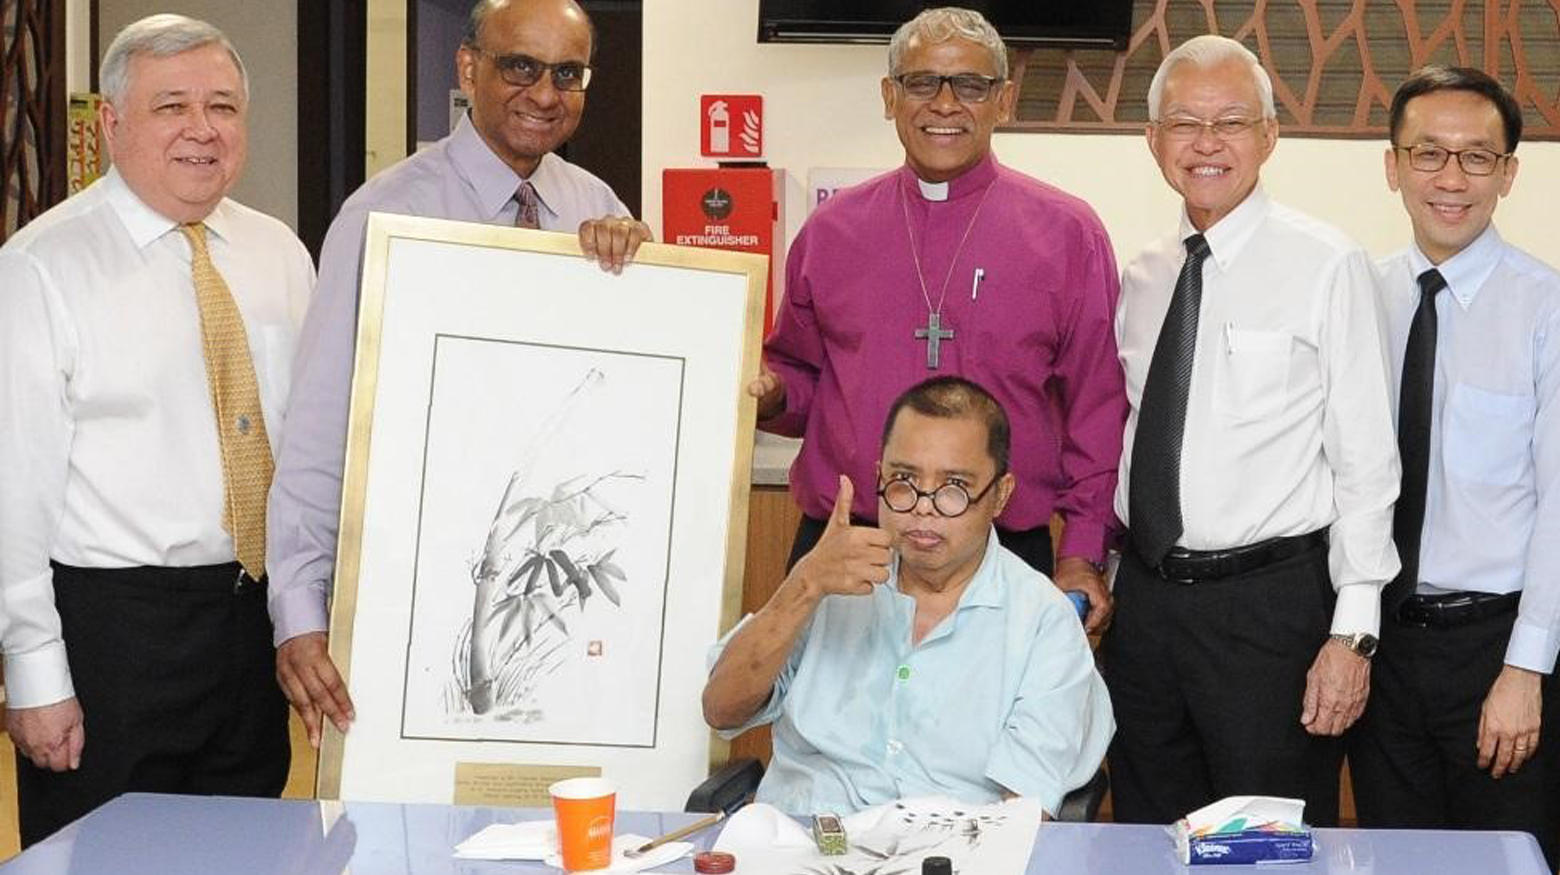 Mr Azman’s bamboo painting was gifted to Mr Tharman Shanmugaratnam, Senior Minister and Coordinating Minister for Social Policies